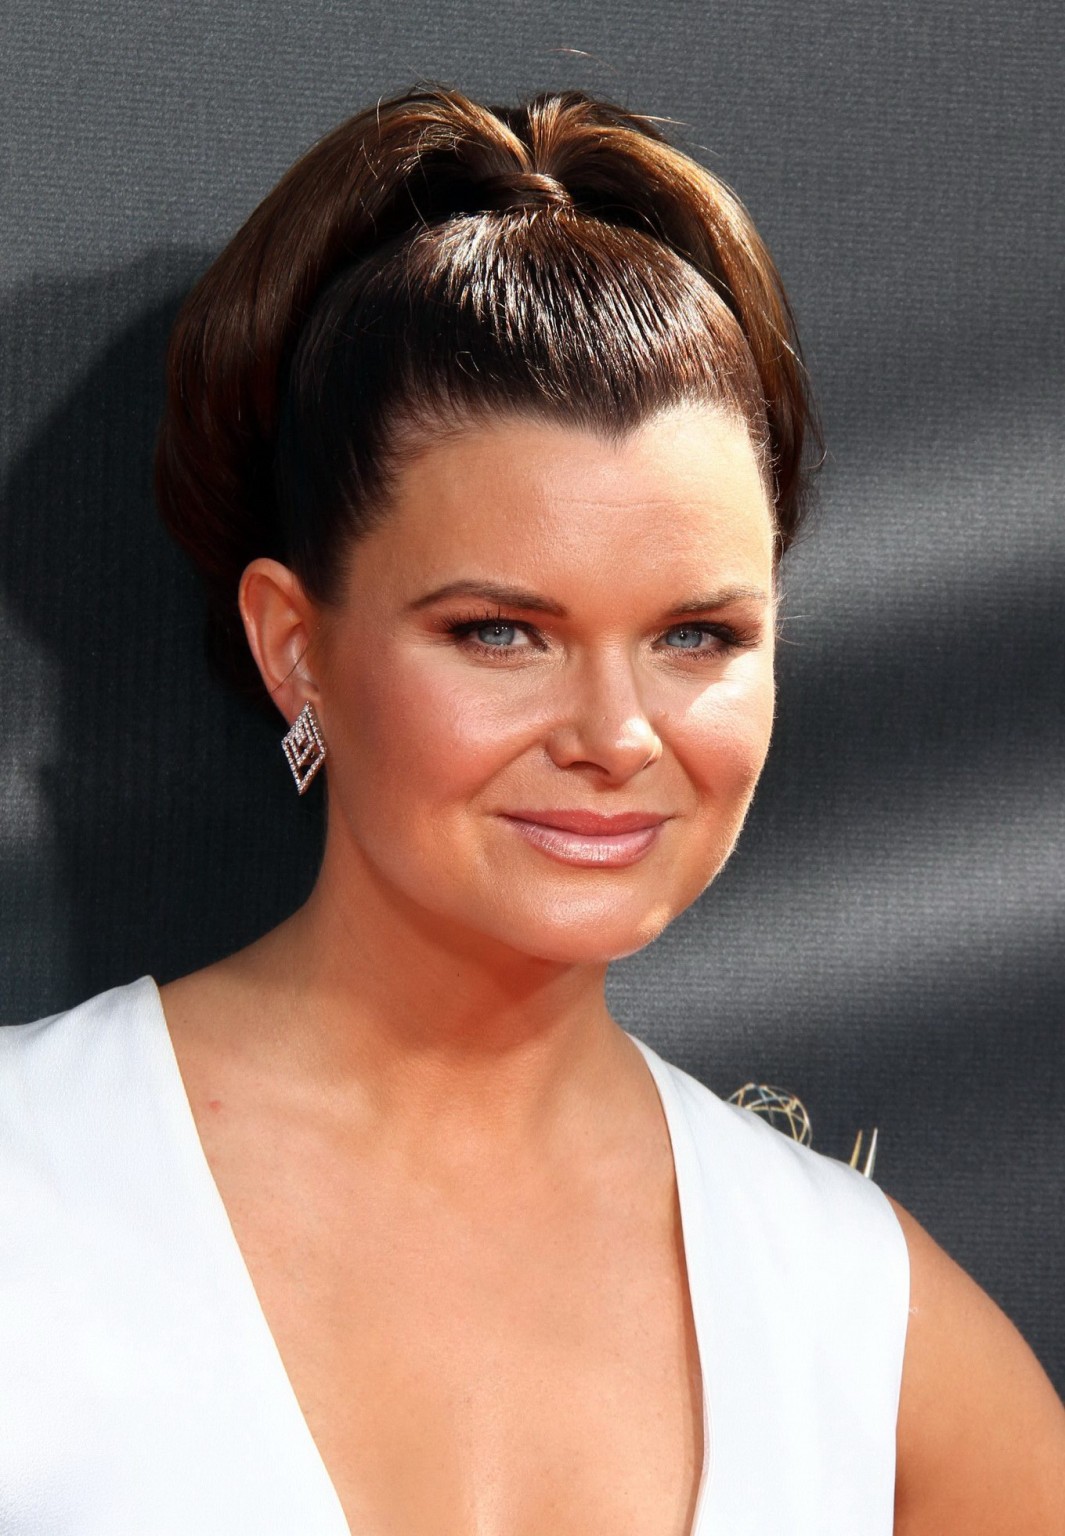 Heather Tom showing huge cleavage at the 42nd Annual Daytime Emmy Awards at Warn #75165768